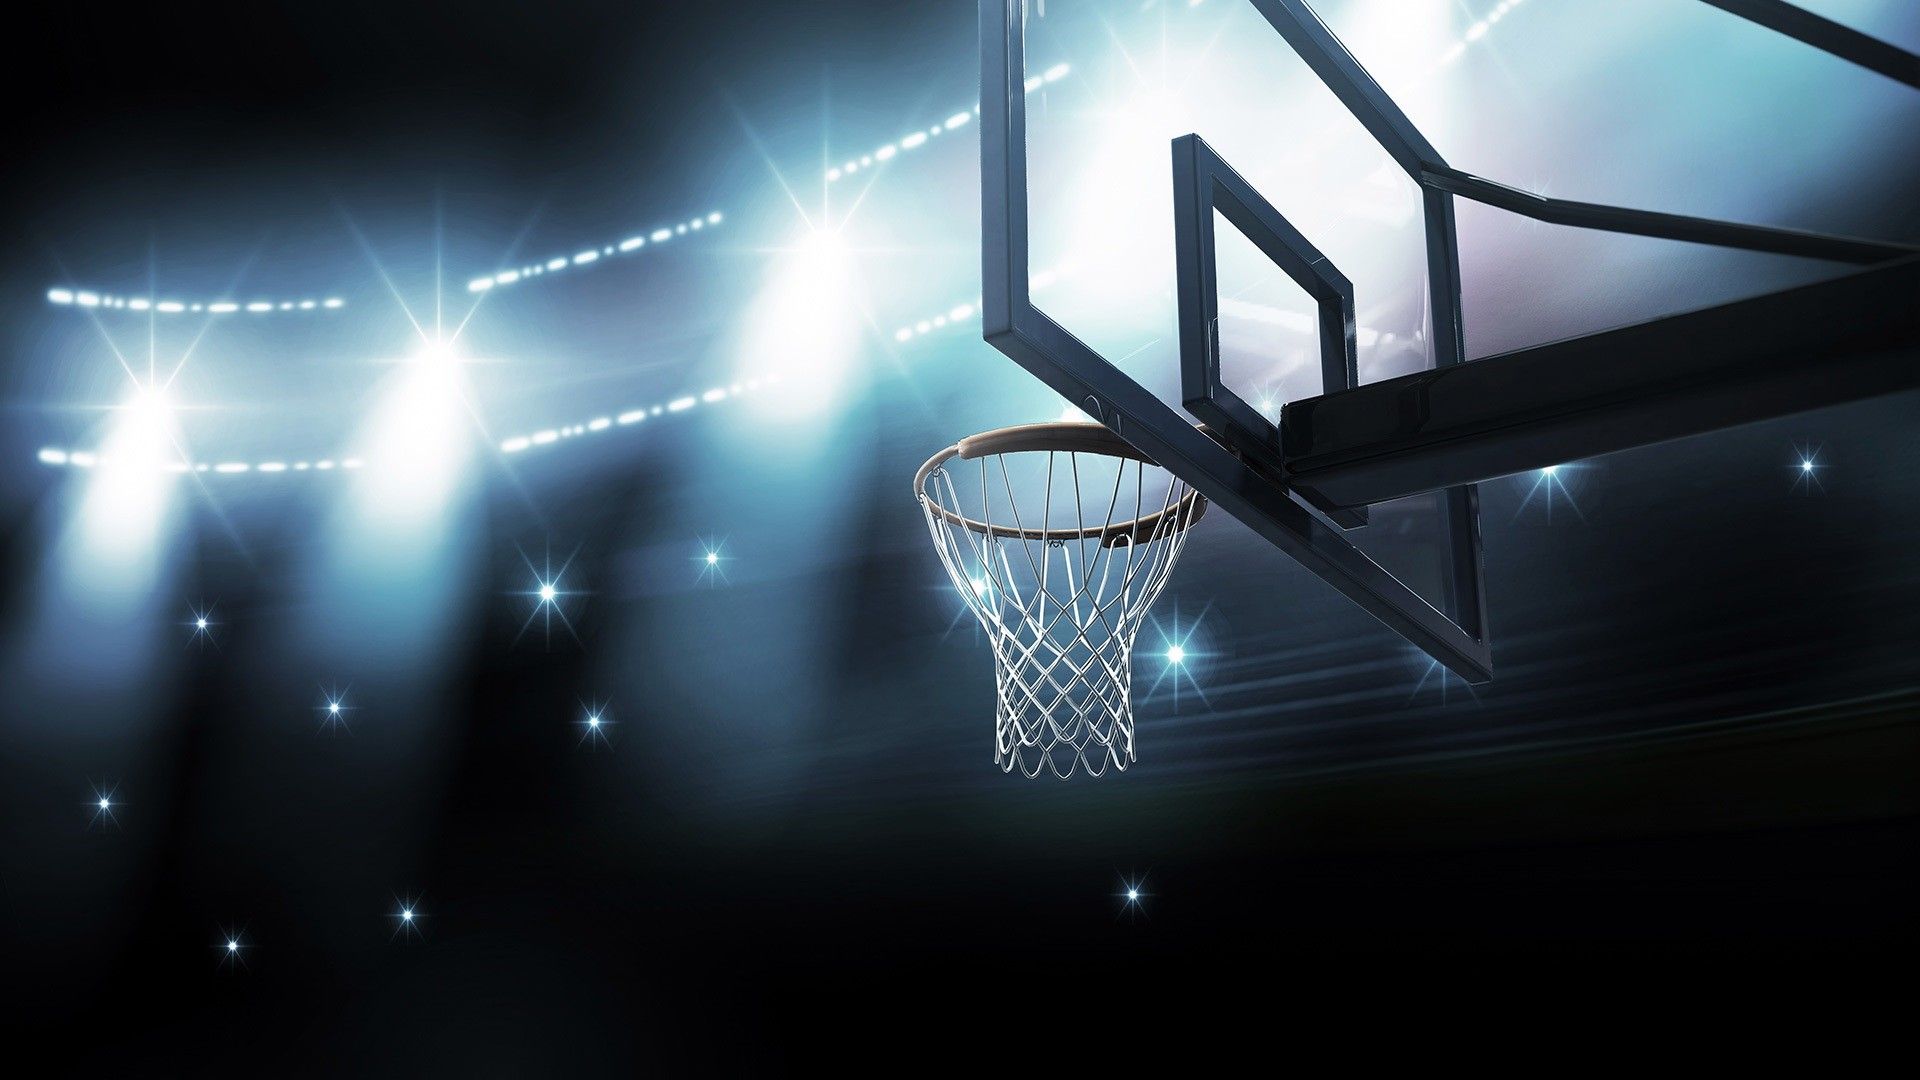 Basketball Wallpaper, Background, Image, picture Court Flashing Lights